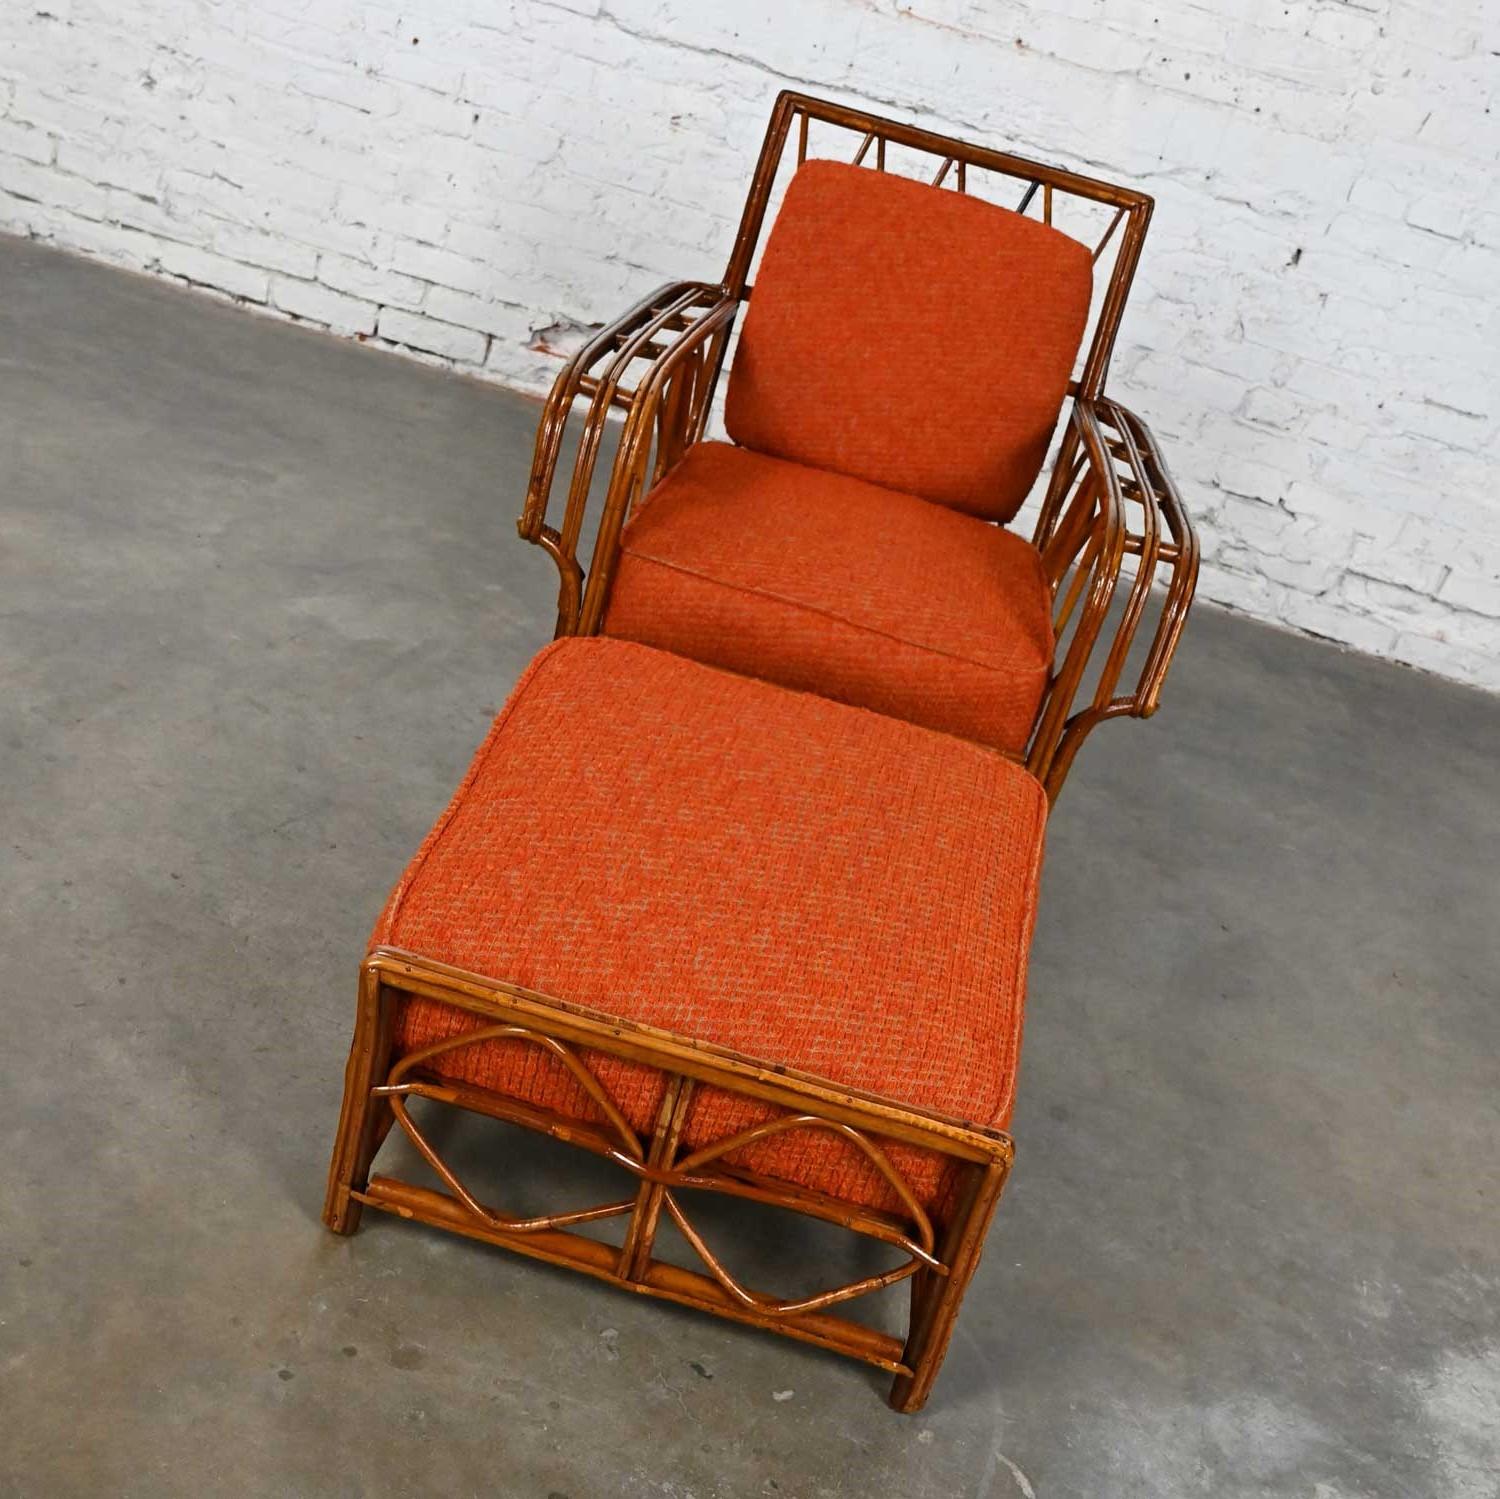 American Rattan Lounge Chair & Ottoman Orange Fabric Cushions by Helmers Manufacturing Co